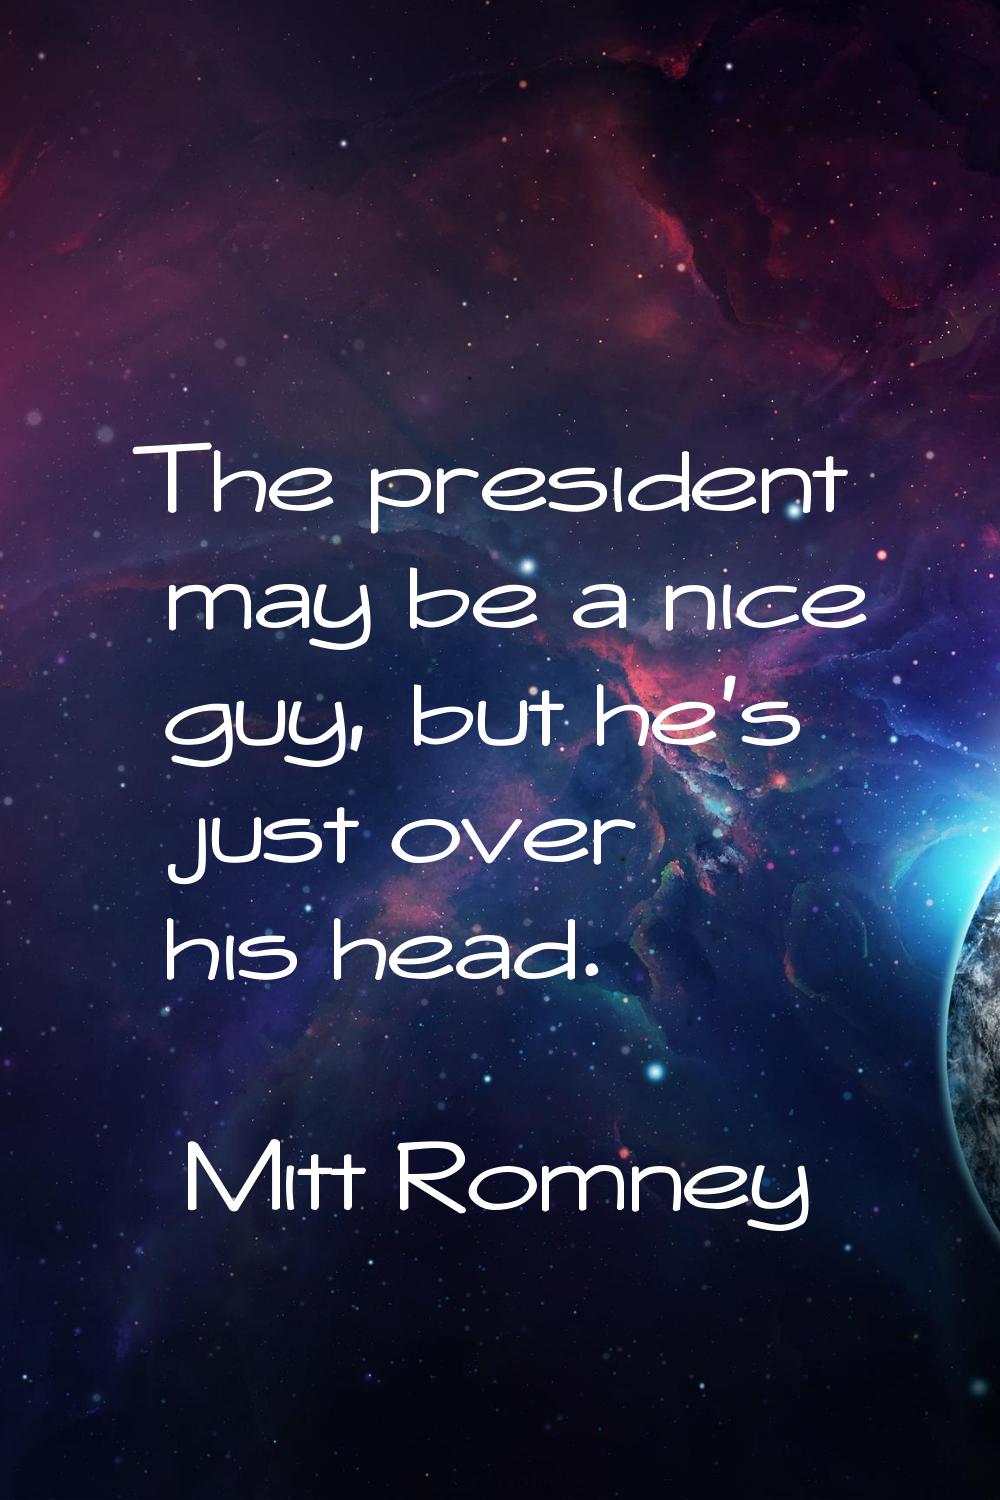 The president may be a nice guy, but he's just over his head.